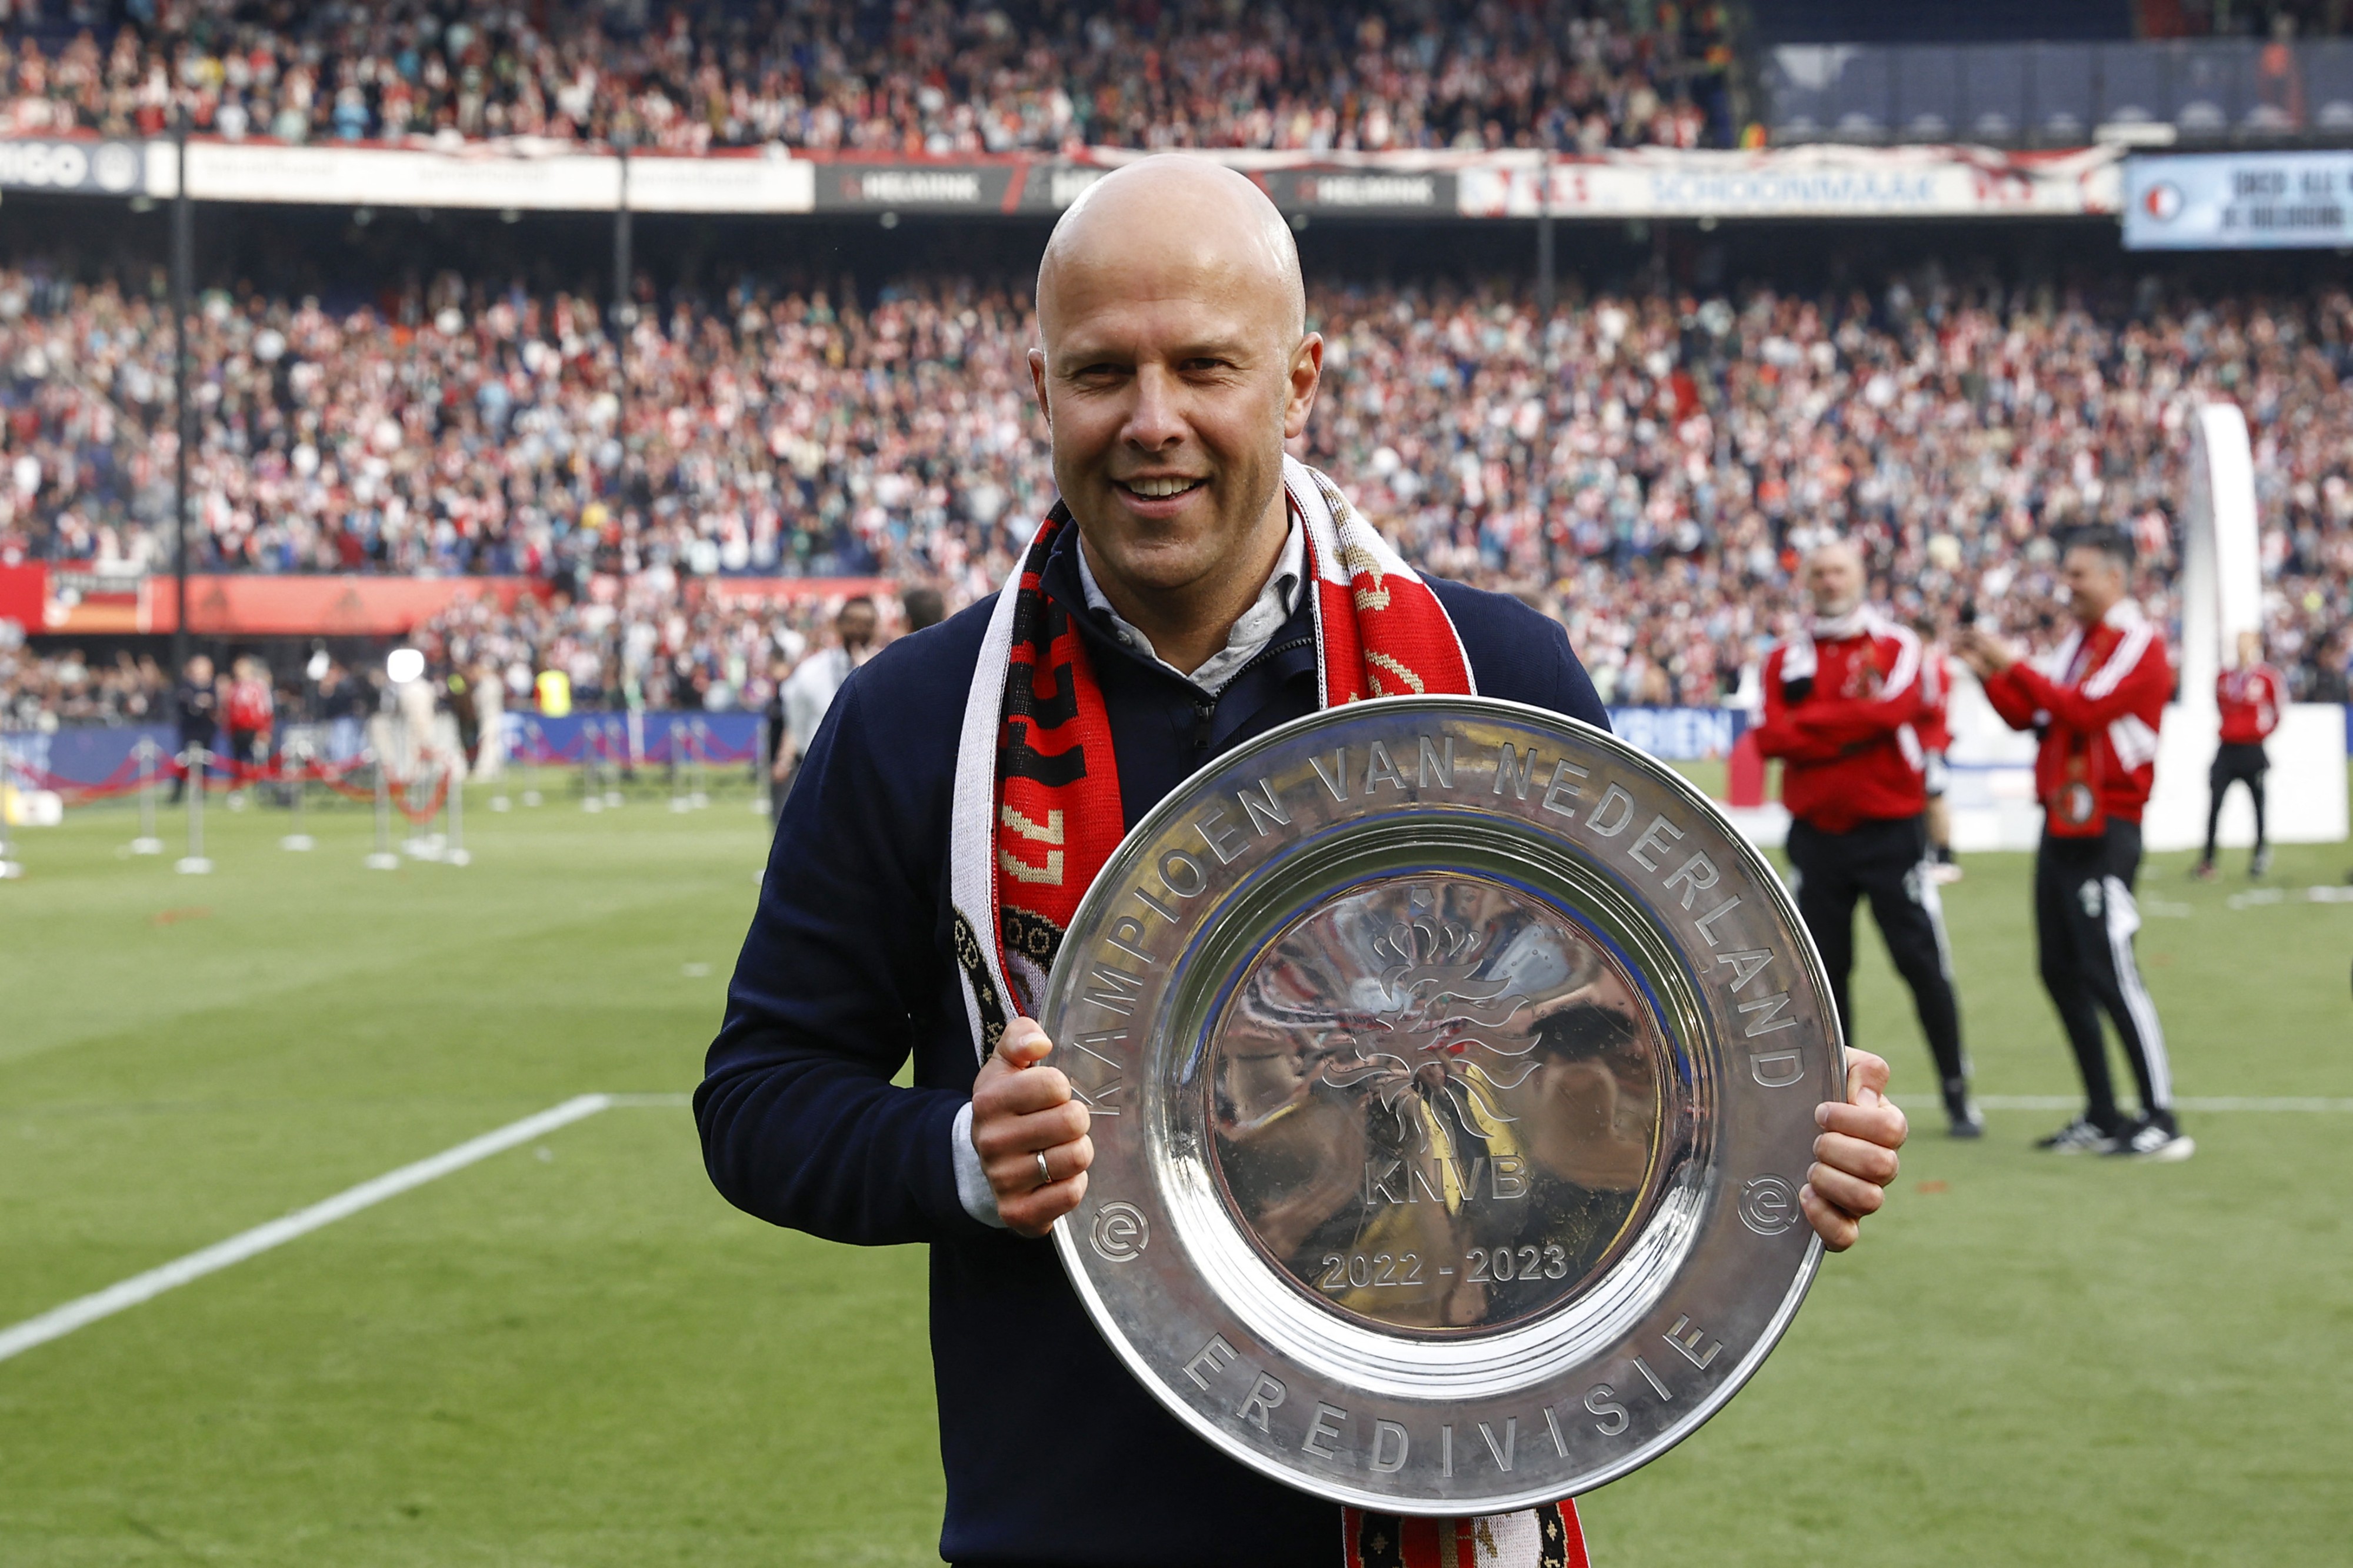 Arne Slot's backroom team at Feyenoord have agreed to join Liverpool